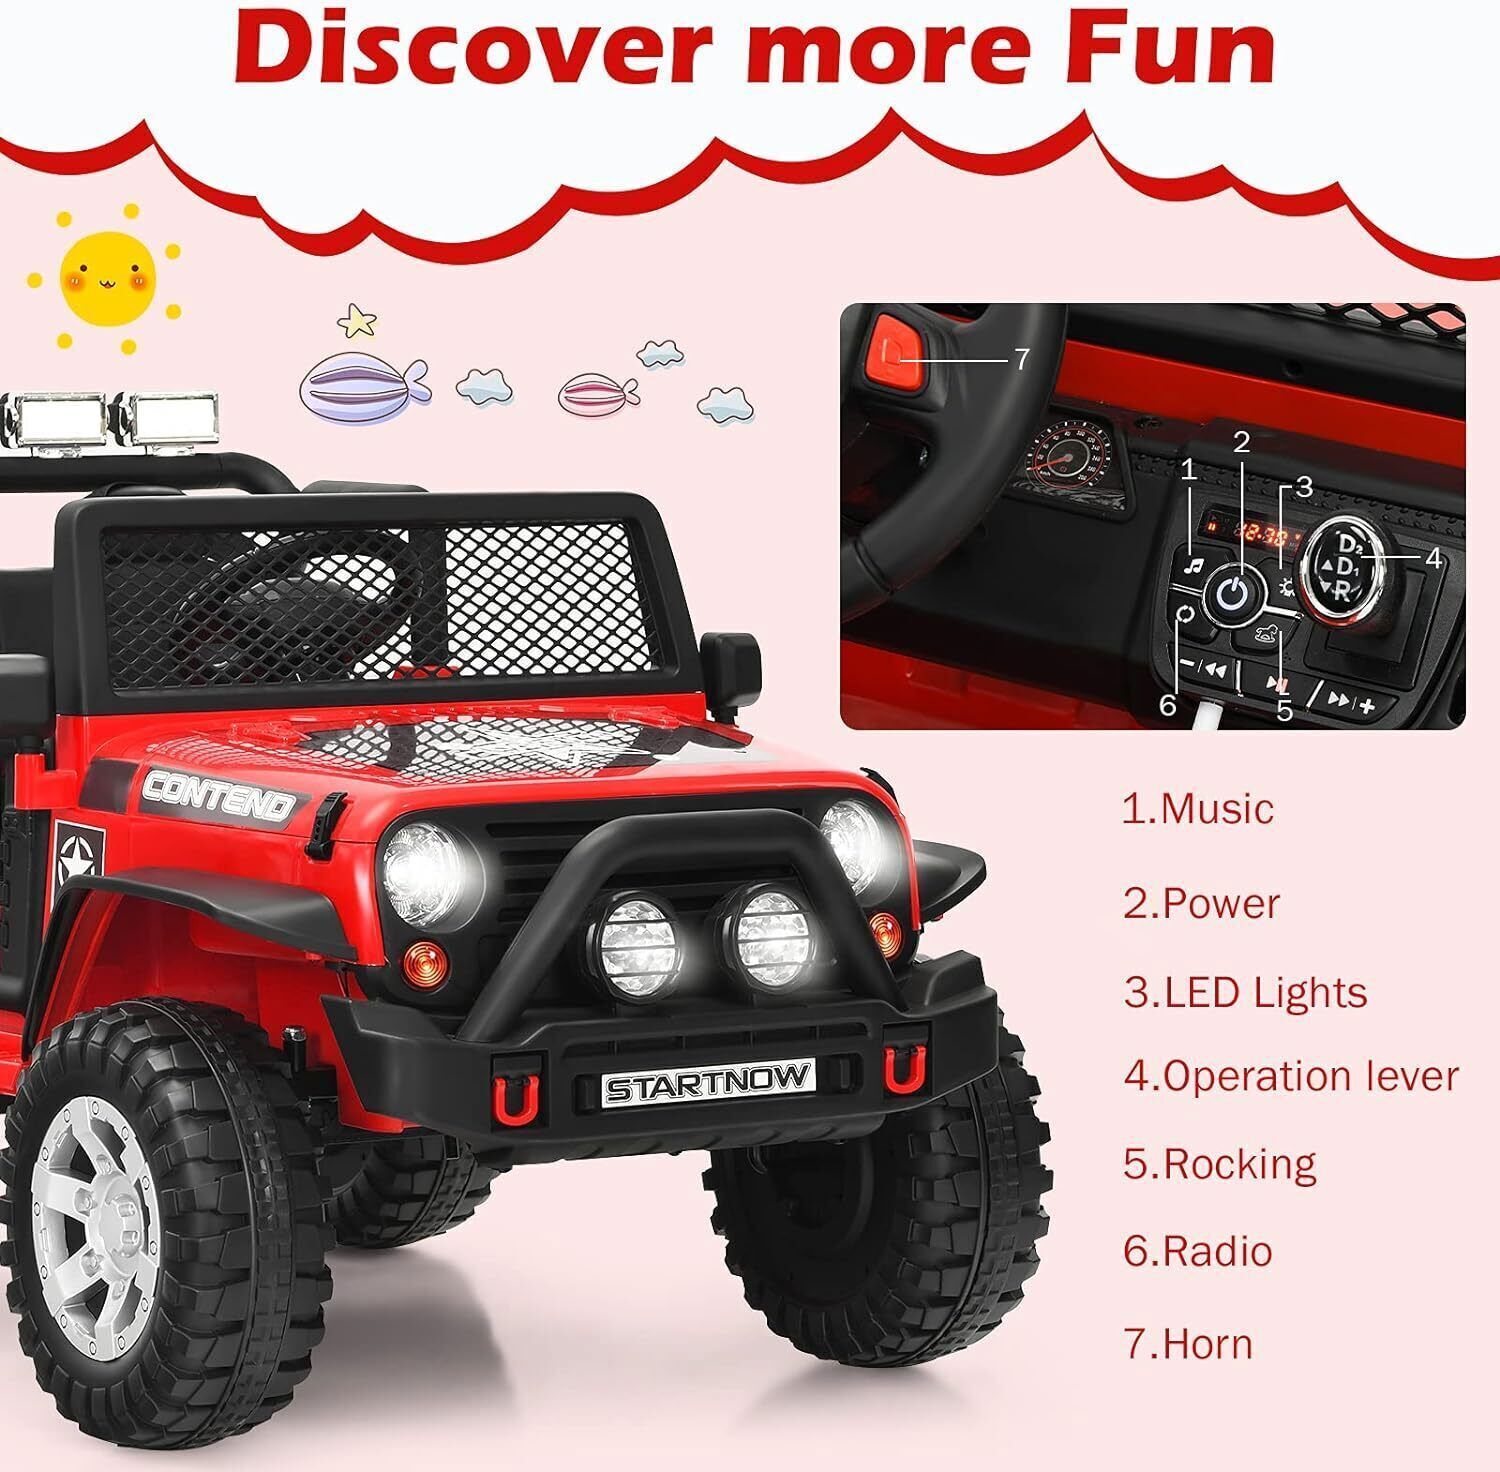 Dazone 12V Kids Ride on Jeep Car, Electric 2 Seats Off-road Jeep Ride on Truck Vehicle with Remote Control, LED Lights, MP3 Music, Red - image 3 of 7